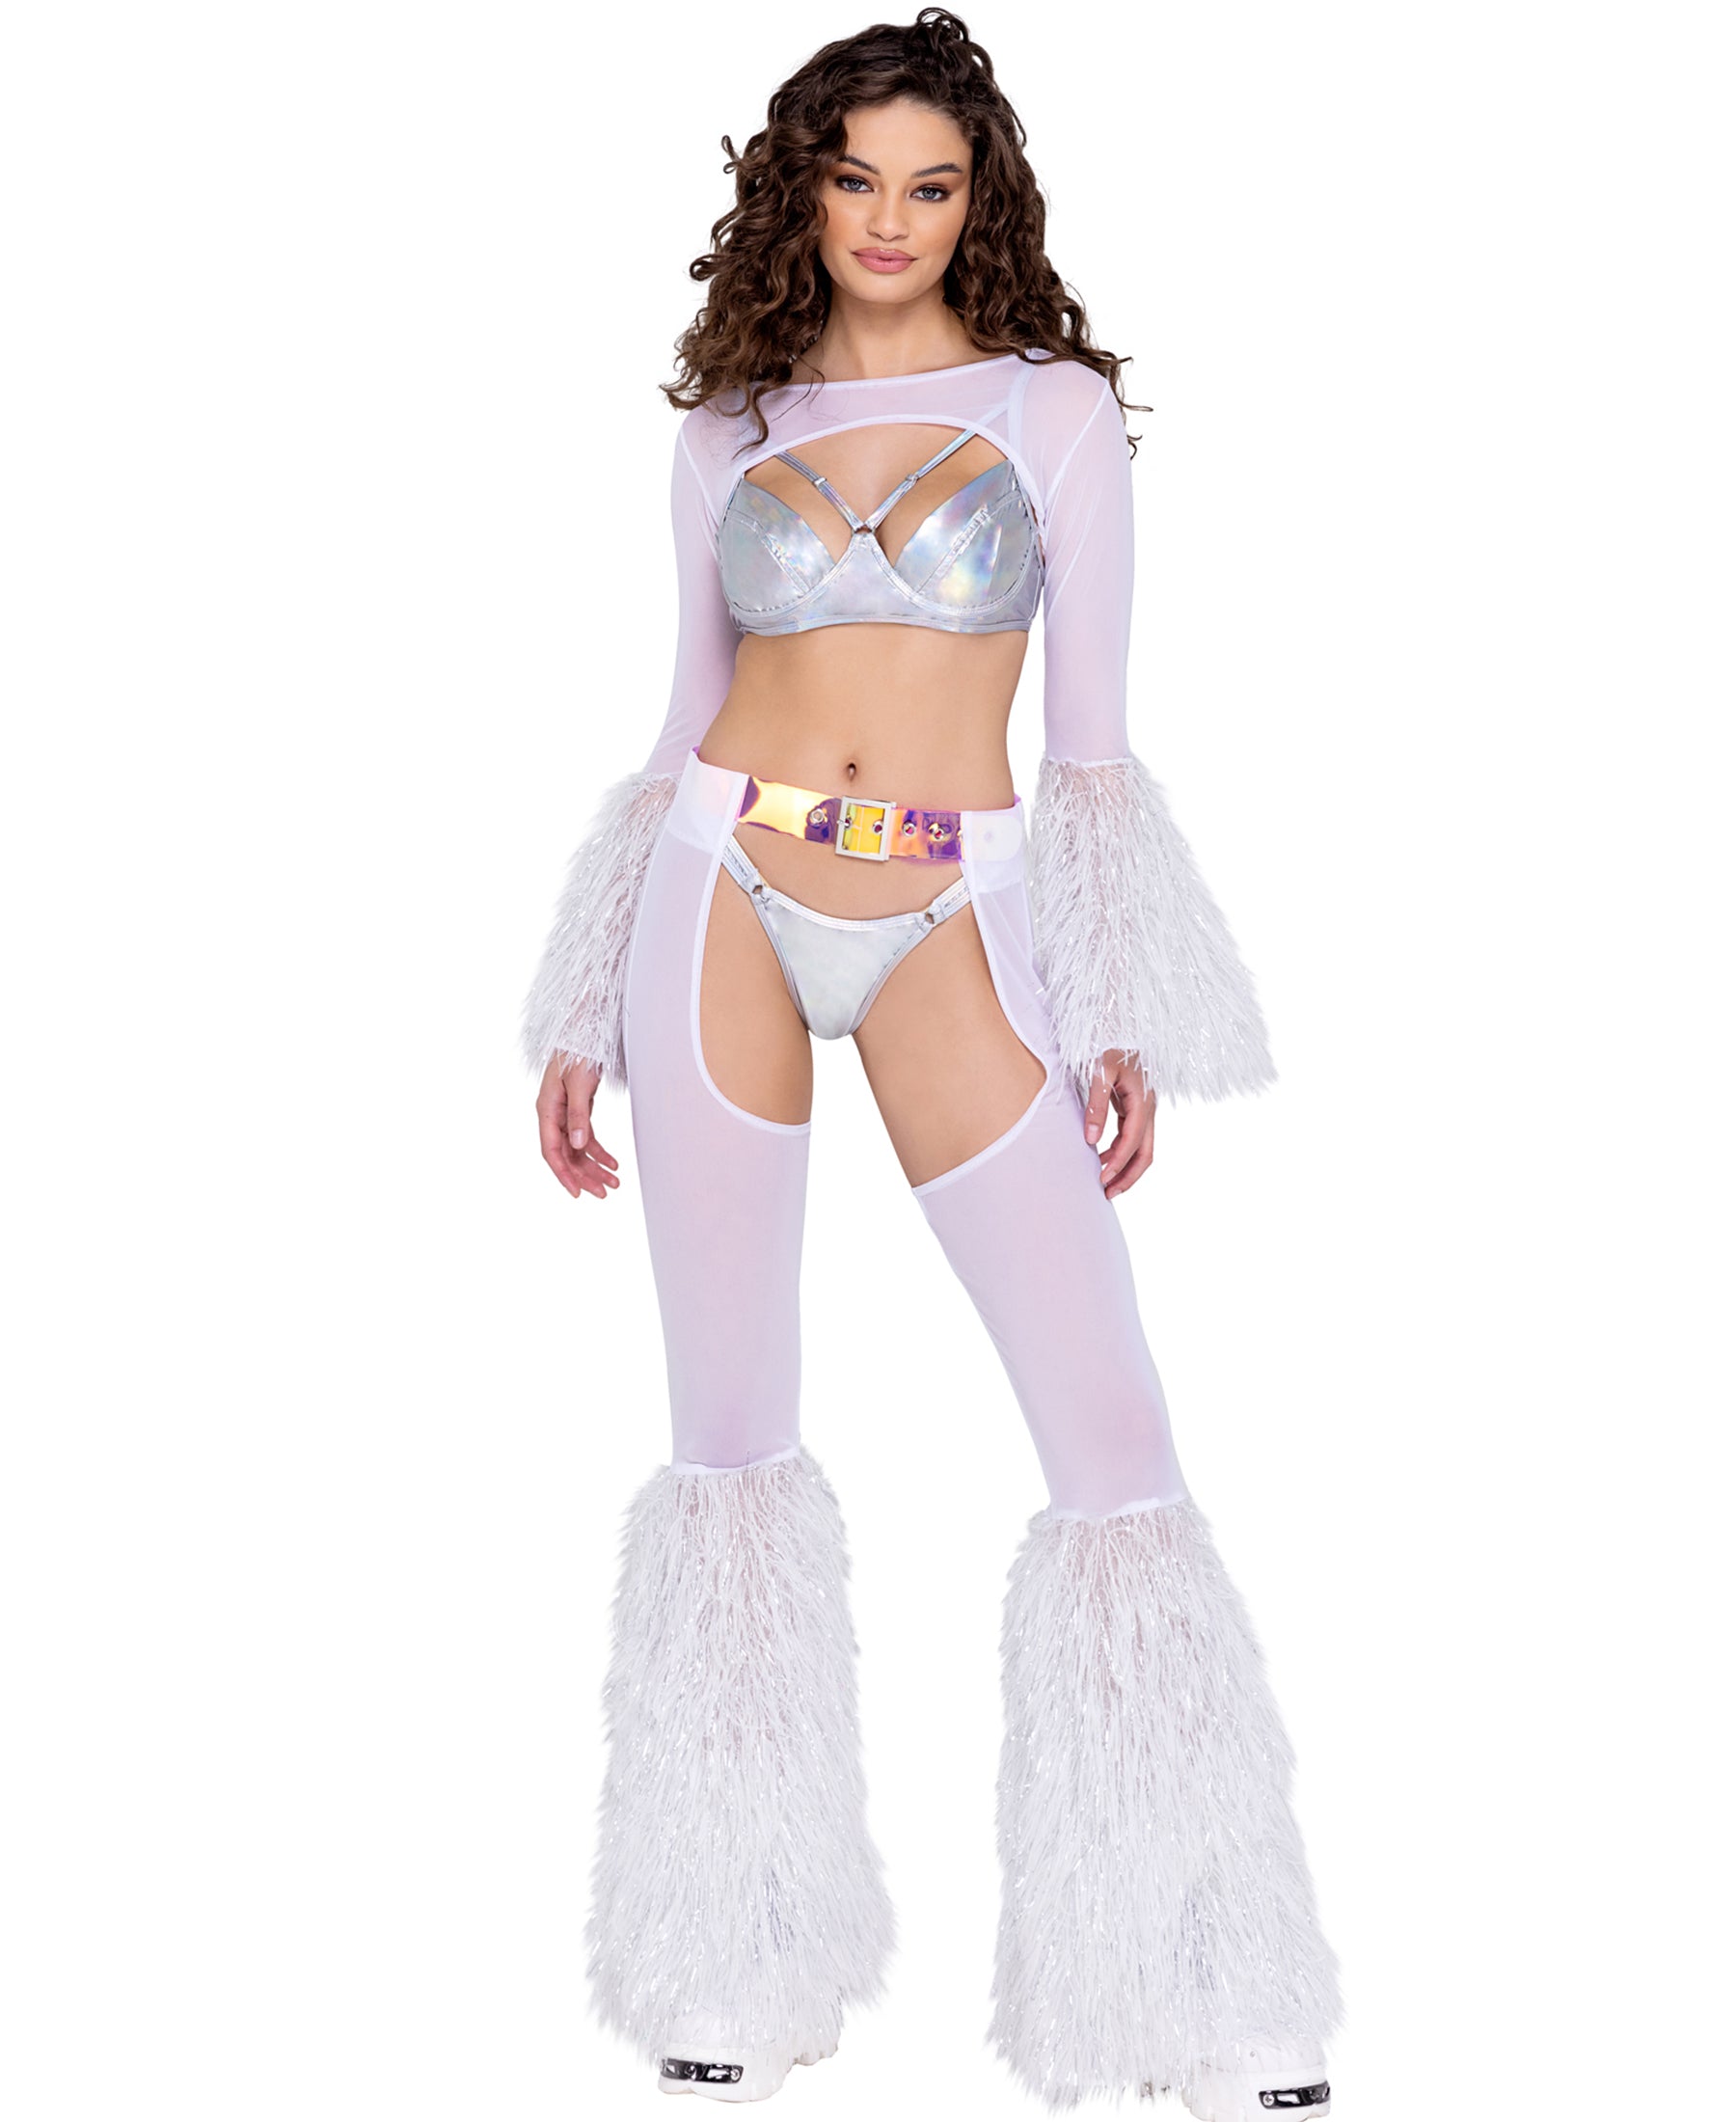 6248 Sheer Chaps with Faux Fur Bell & Belt White Front view 